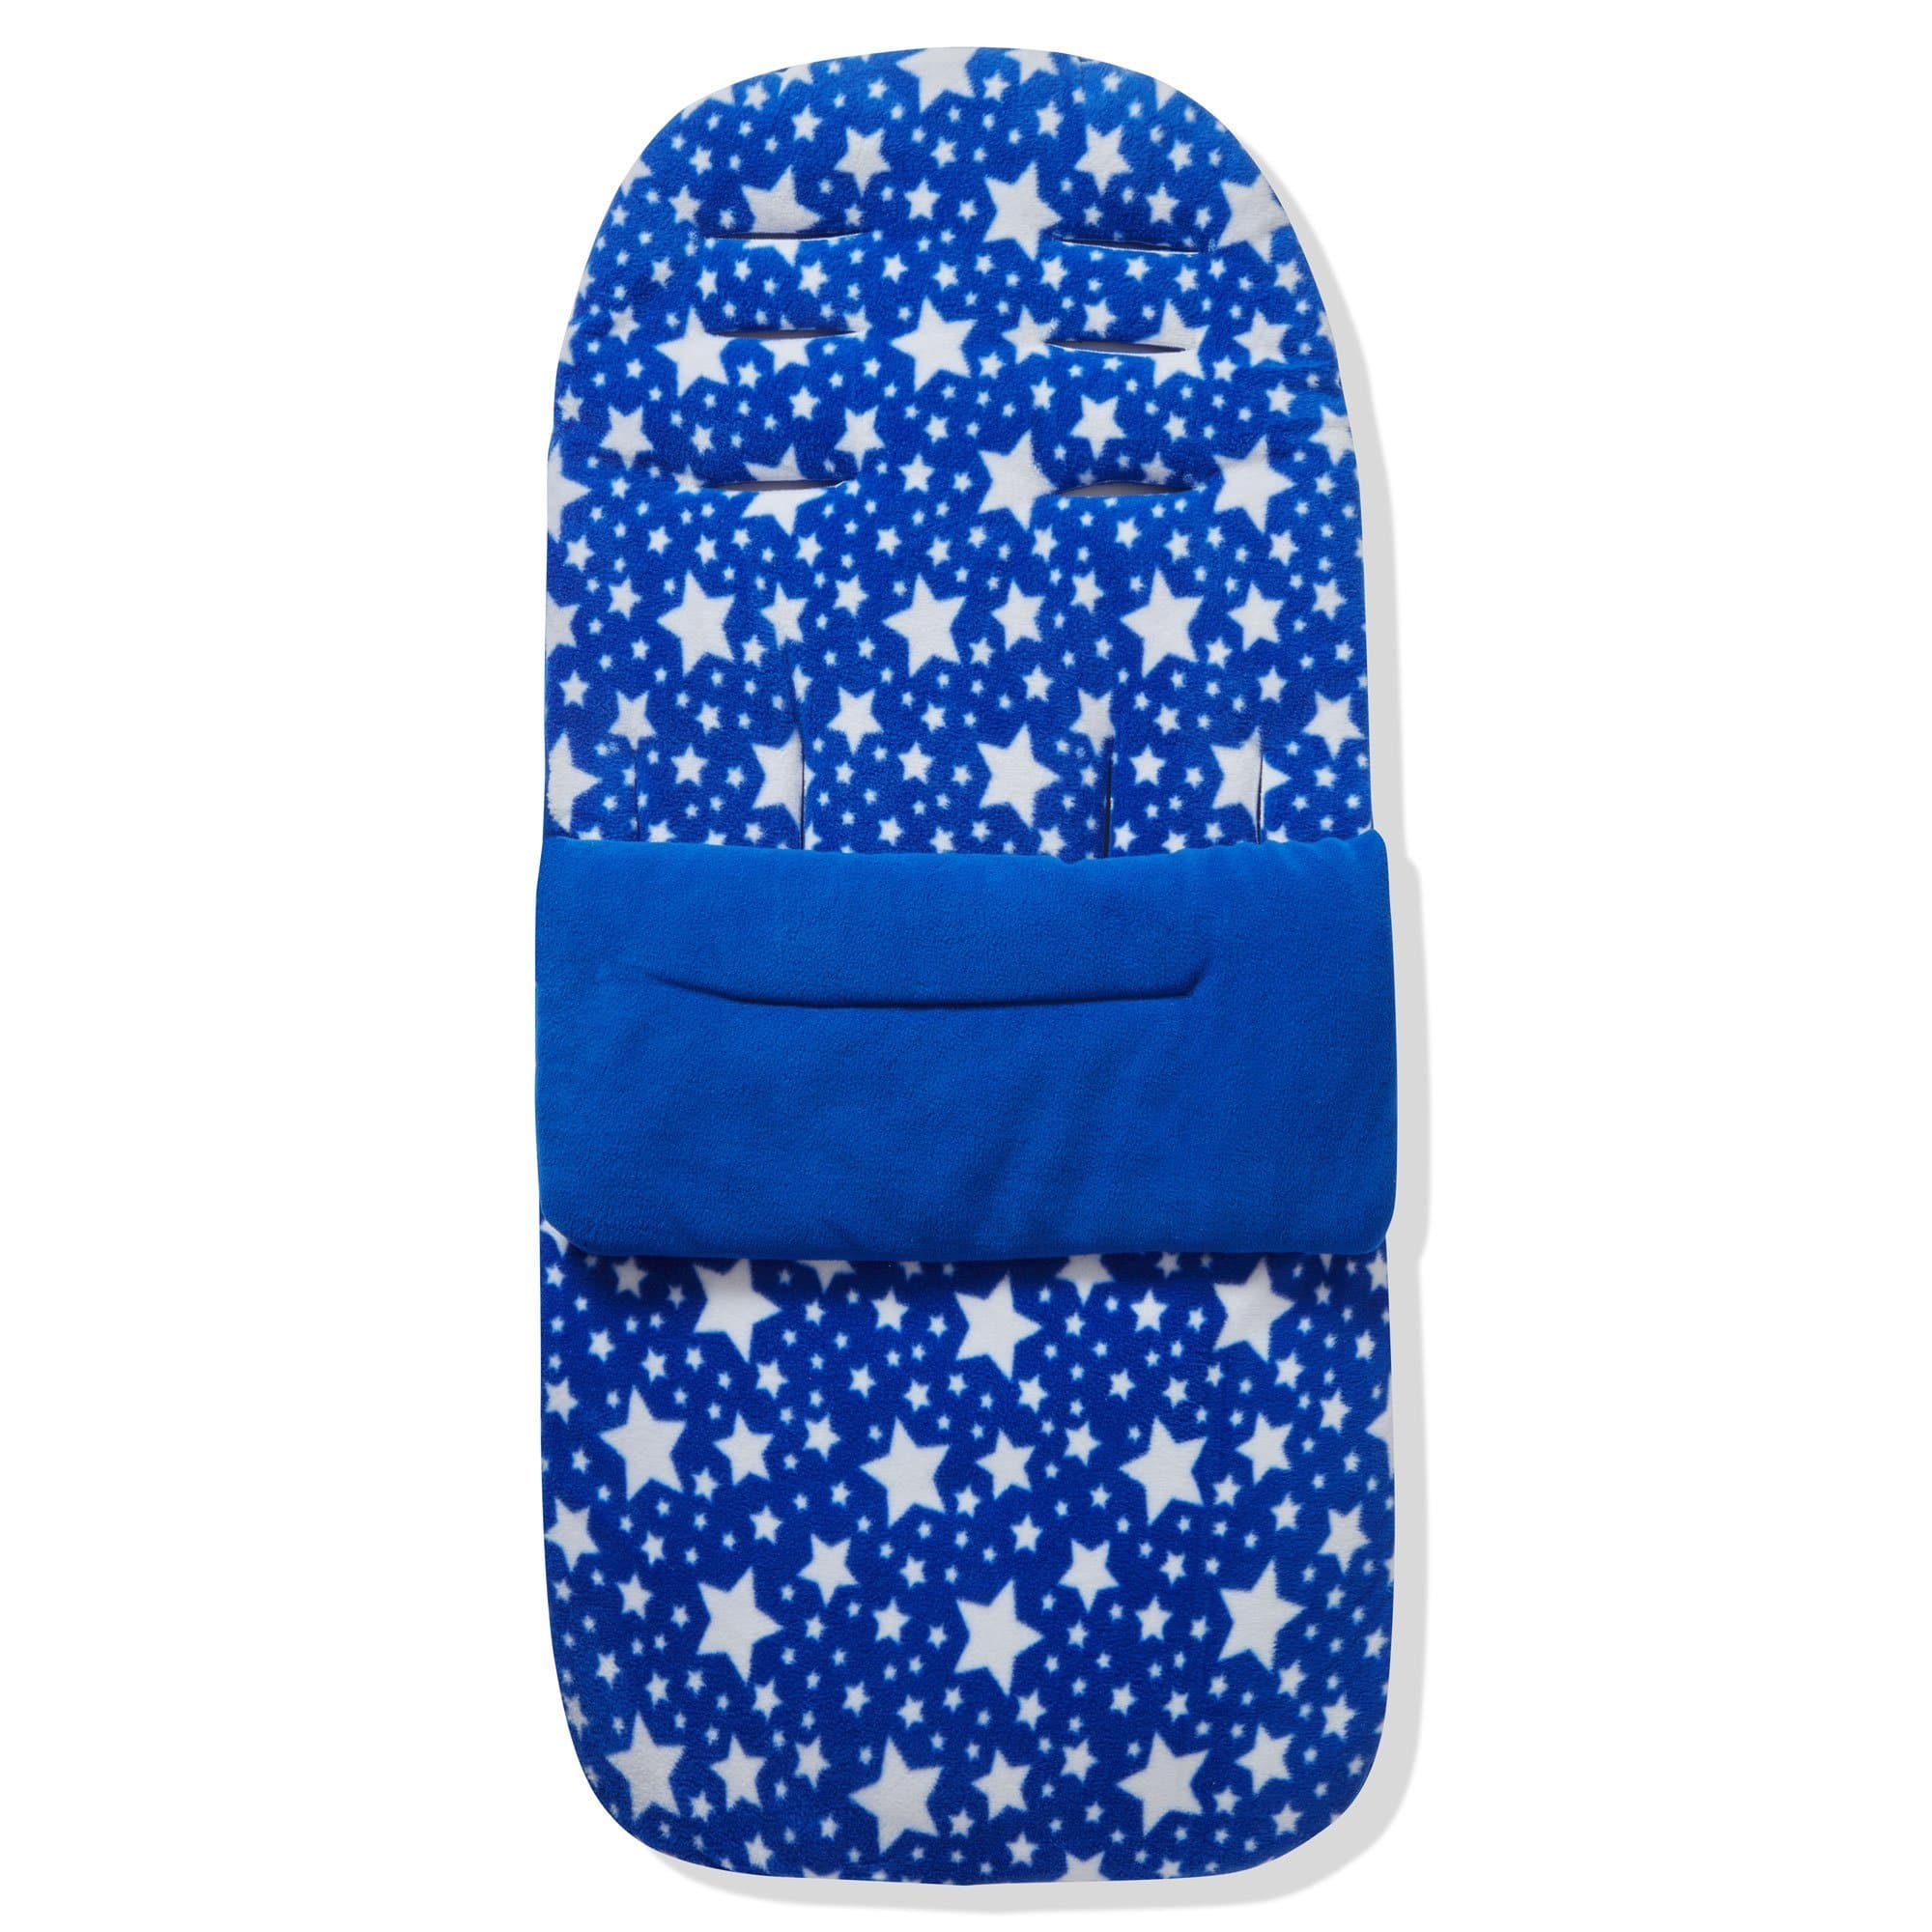 Fleece Footmuff / Cosy Toes Compatible with Firstwheels - Blue Star / Fits All Models | For Your Little One